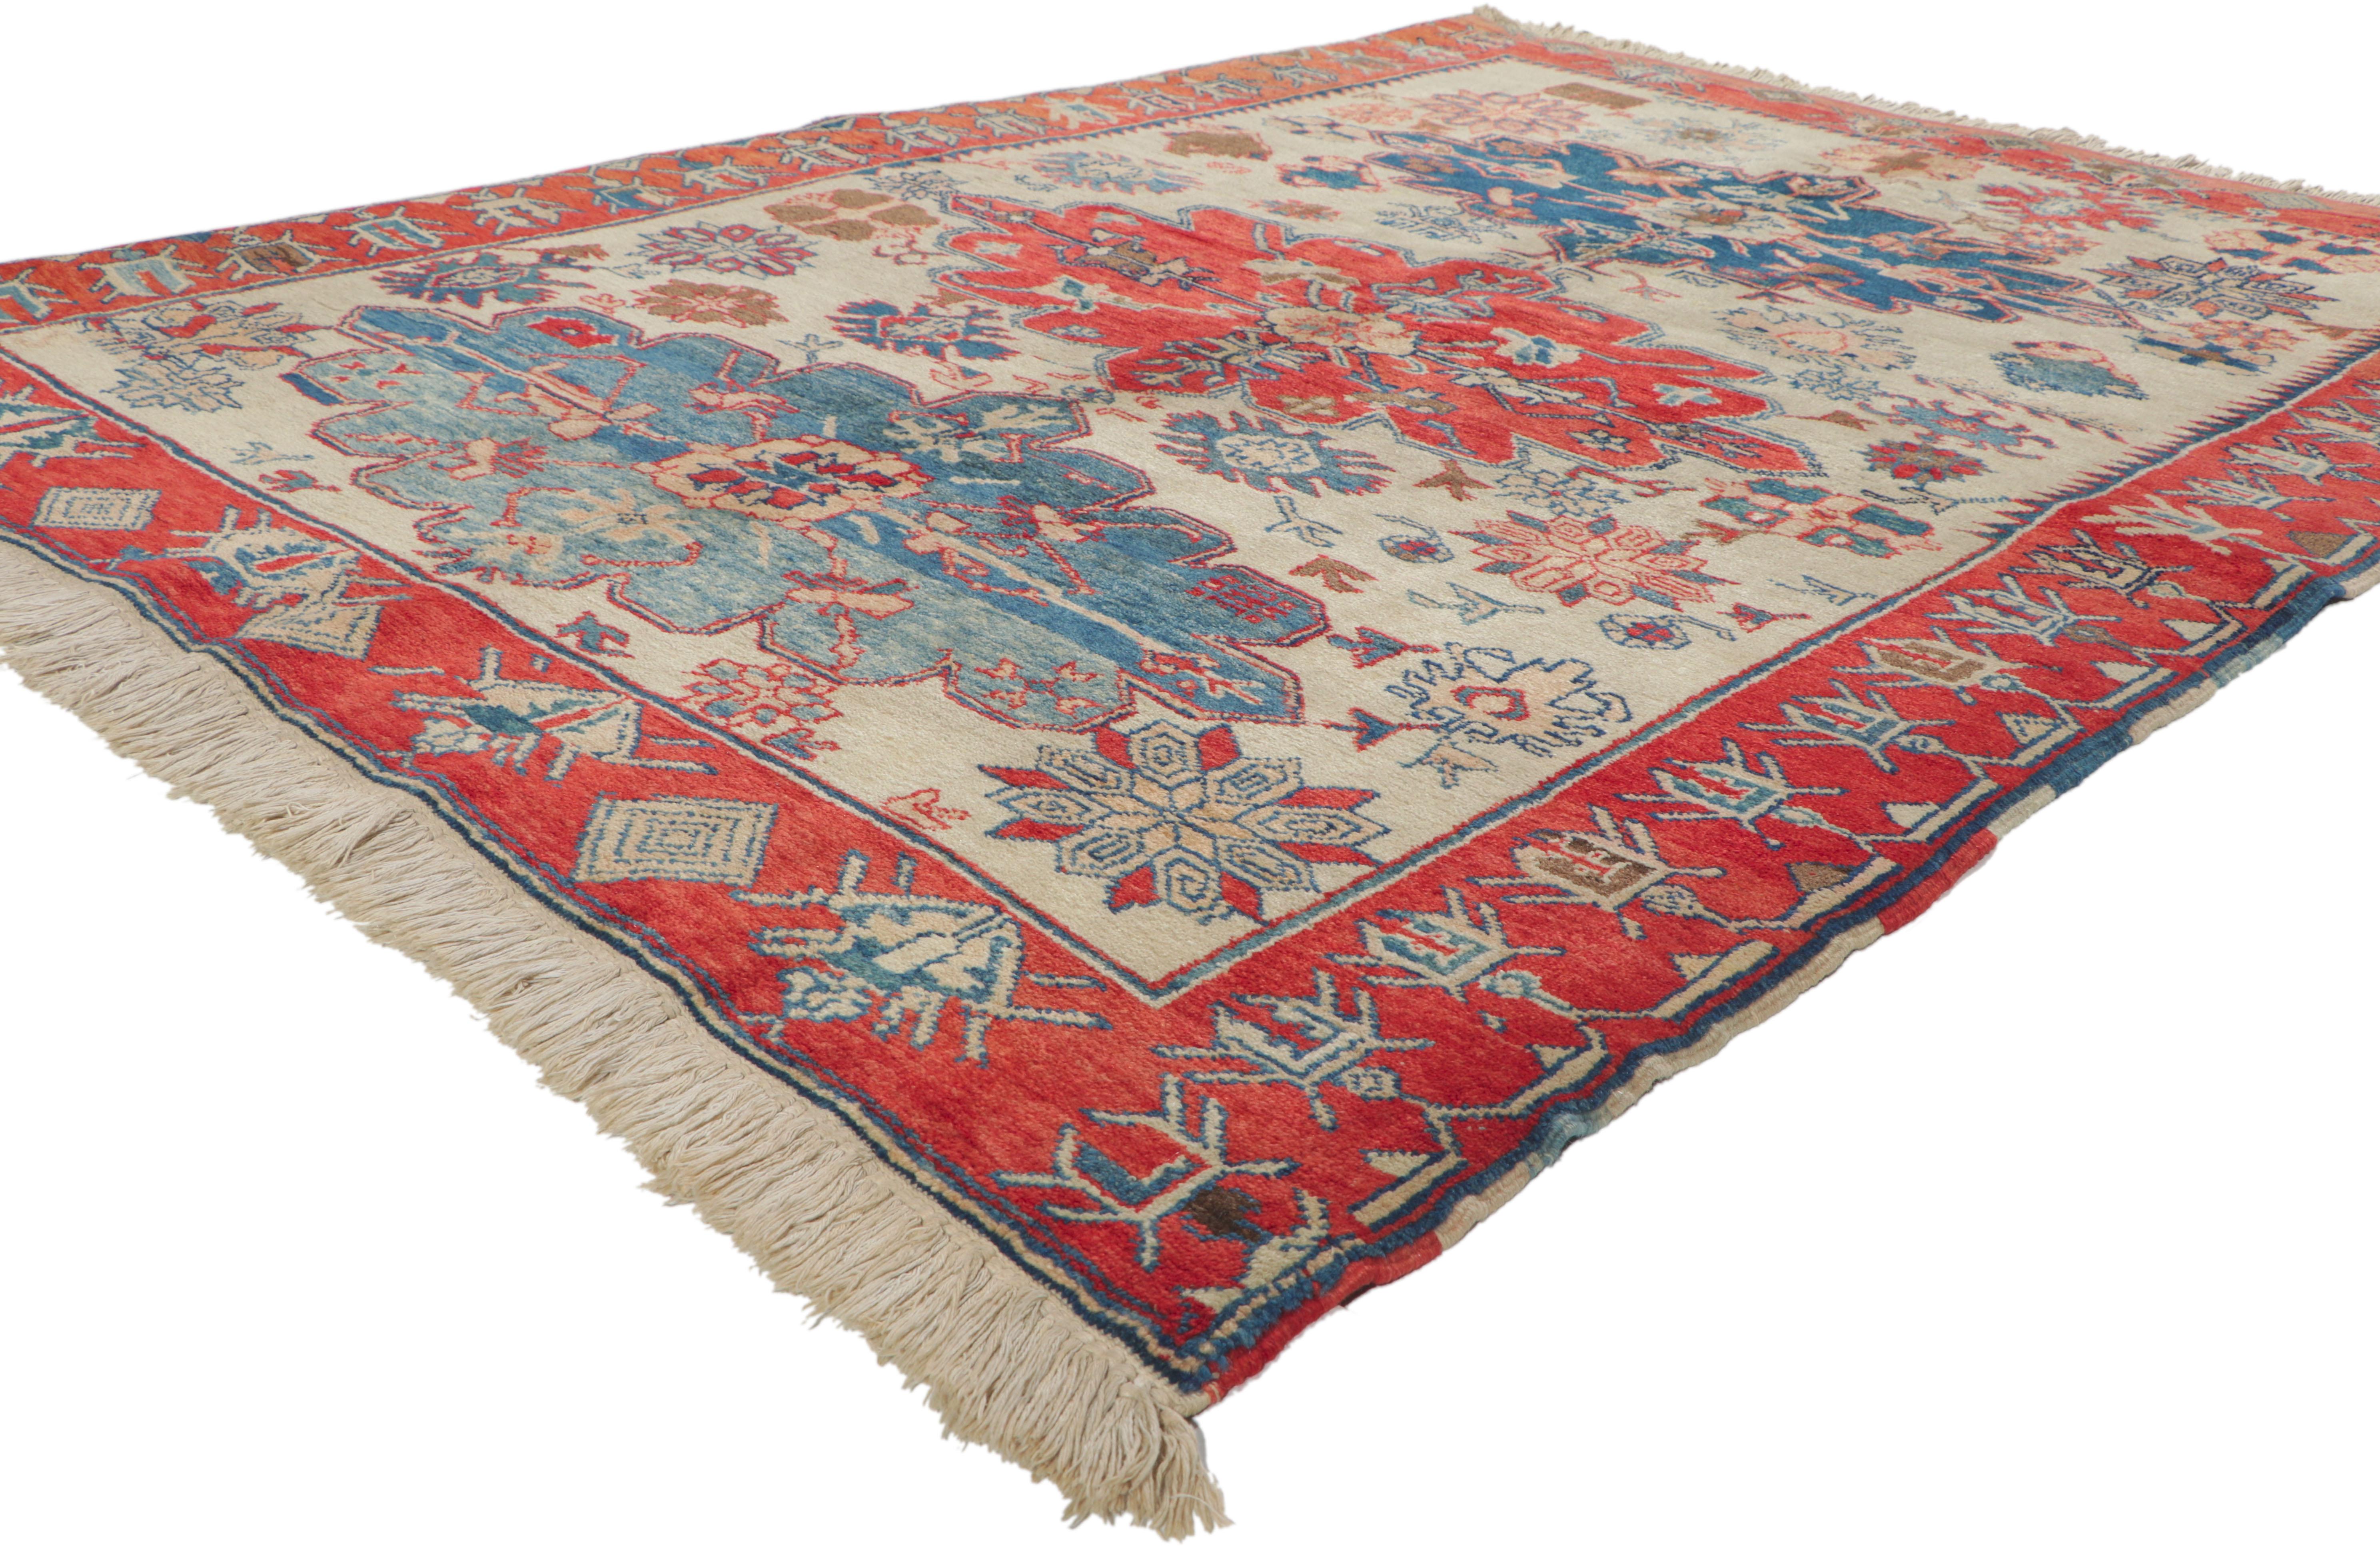 71996 Vintage Turkish rug, 04'11 x 06'10. With its nomadic charm, incredible detail and texture, this hand knotted wool vintage Turkish rug is a captivating vision of woven beauty. The eye-catching tribal design and traditional color palette woven